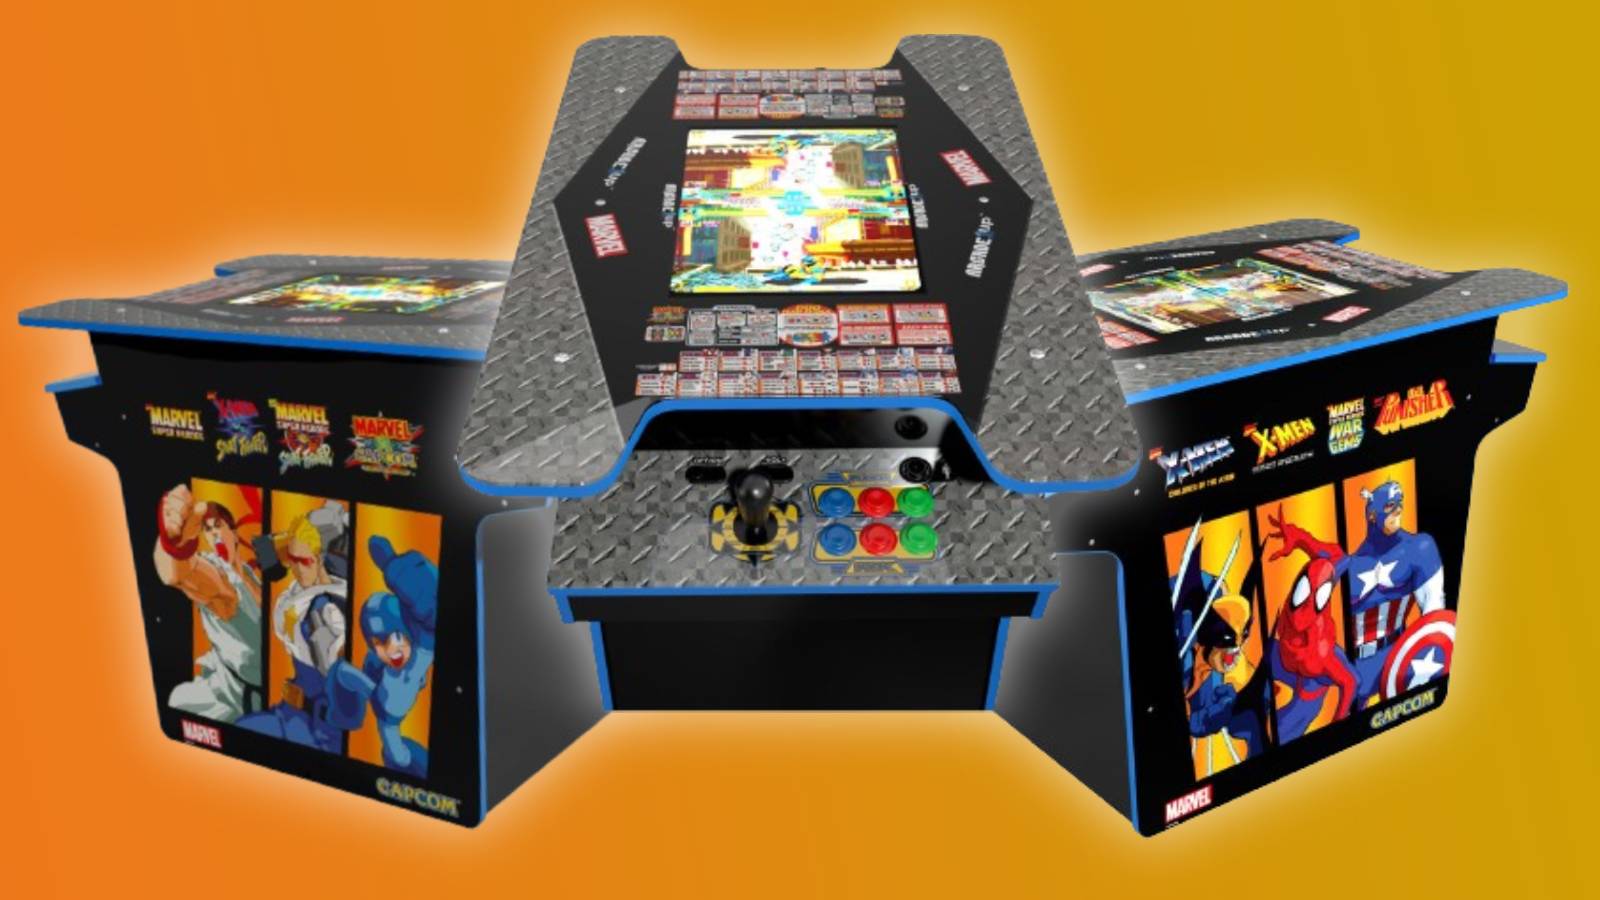 Images of the Marvel vs Capcom arcade table on an orange and yellow background.